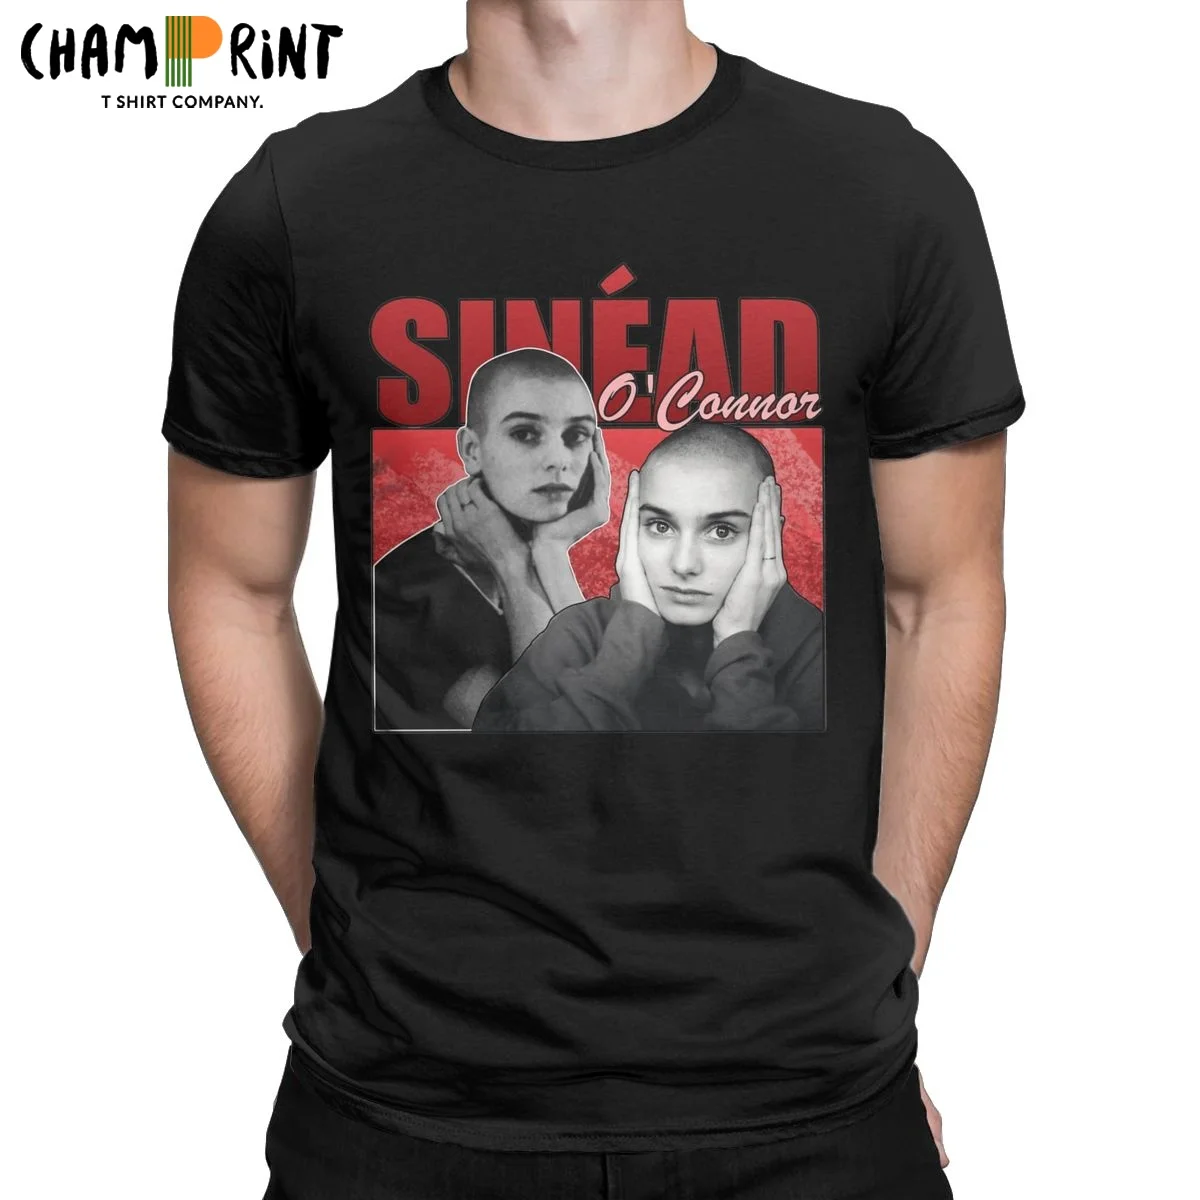 

Sinead Oconnor T Shirt for Men Cotton Funny T-Shirt Round Collar Vintage Inspired 90s 80s Tees Short Sleeve Tops Big Size